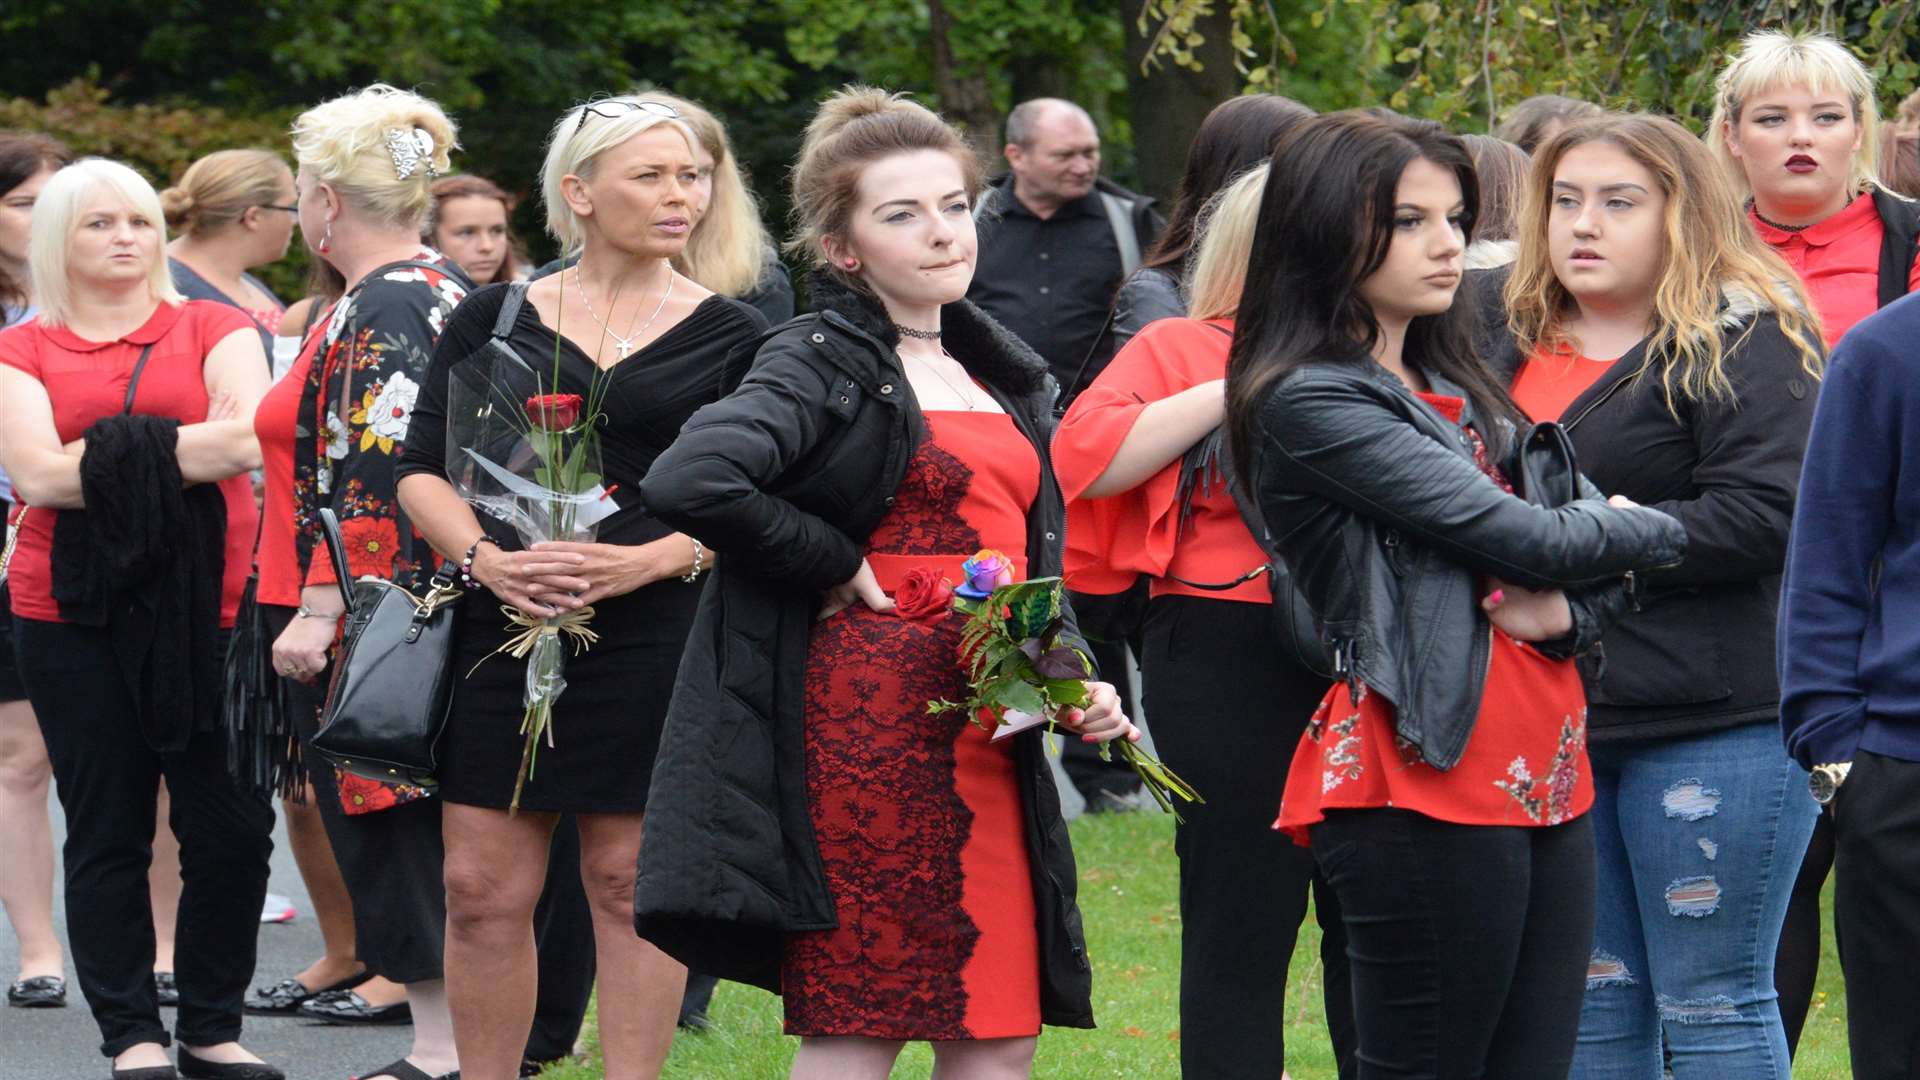 Friends gather for Taiyah's funeral